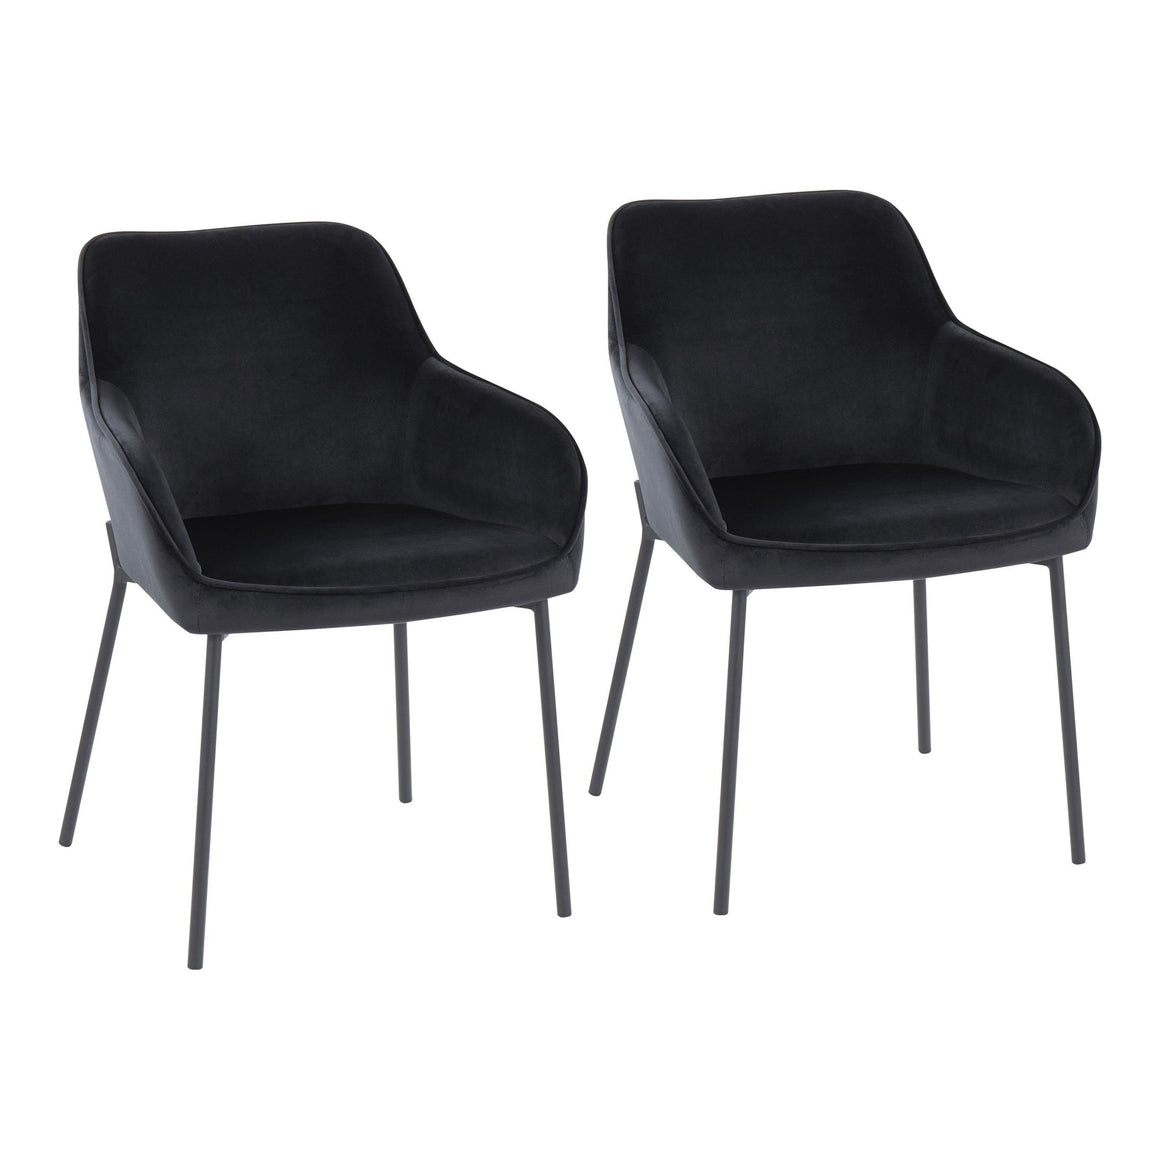 Daniella Contemporary Dining Chair in Black Steel and Black Velvet by LumiSource - Set of 2